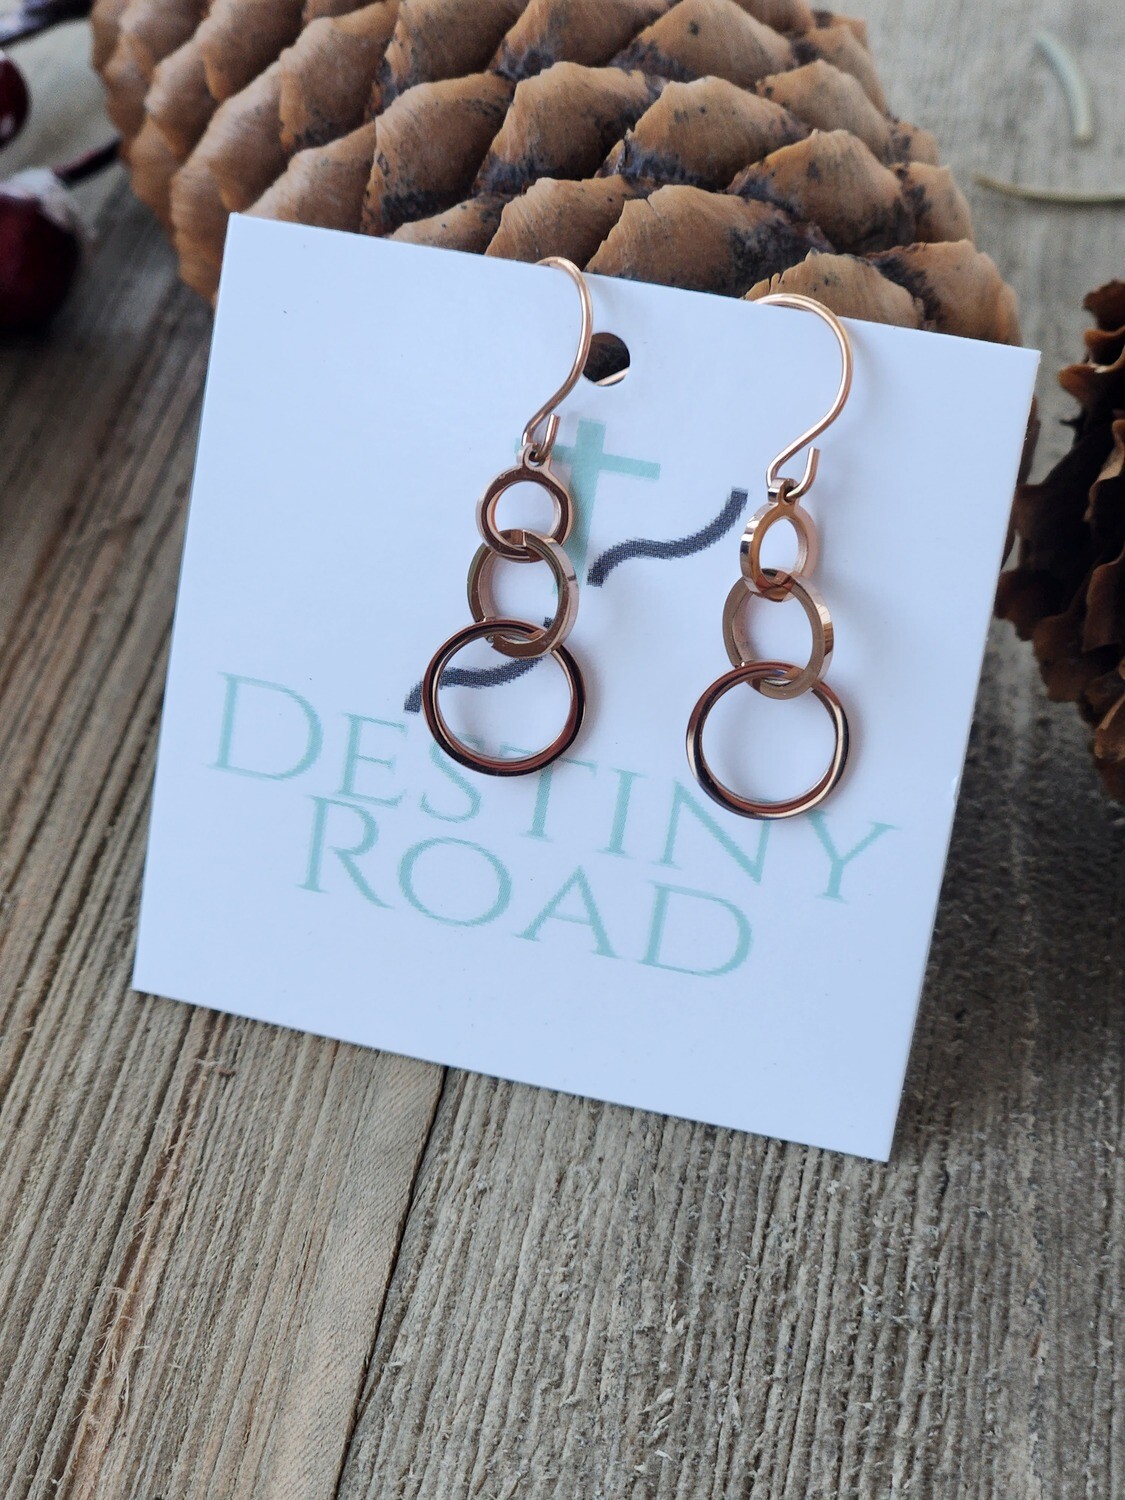 Third Generation Earrings - A62